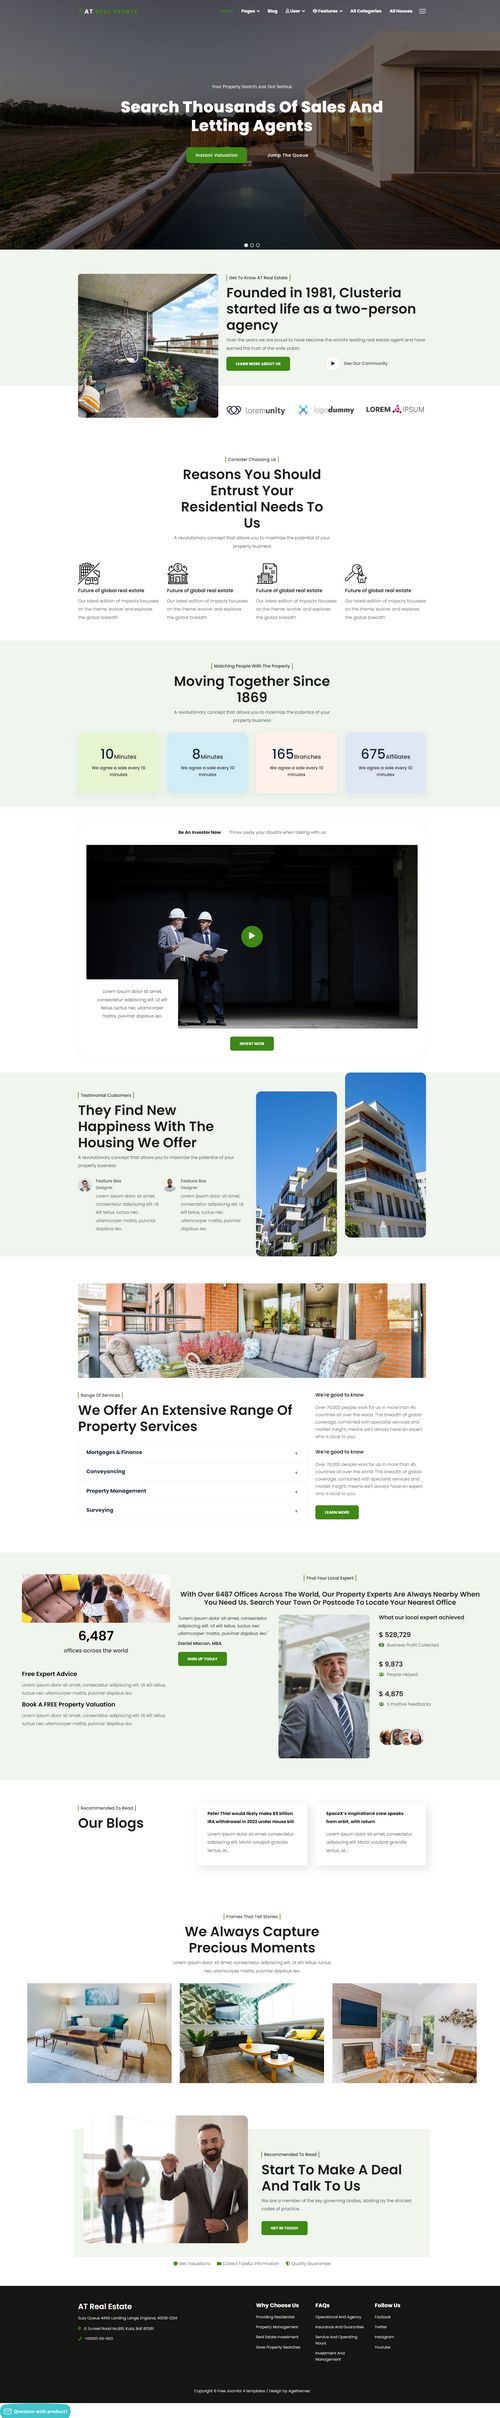 Real Estate - Free homes for rent / real estate Joomla template